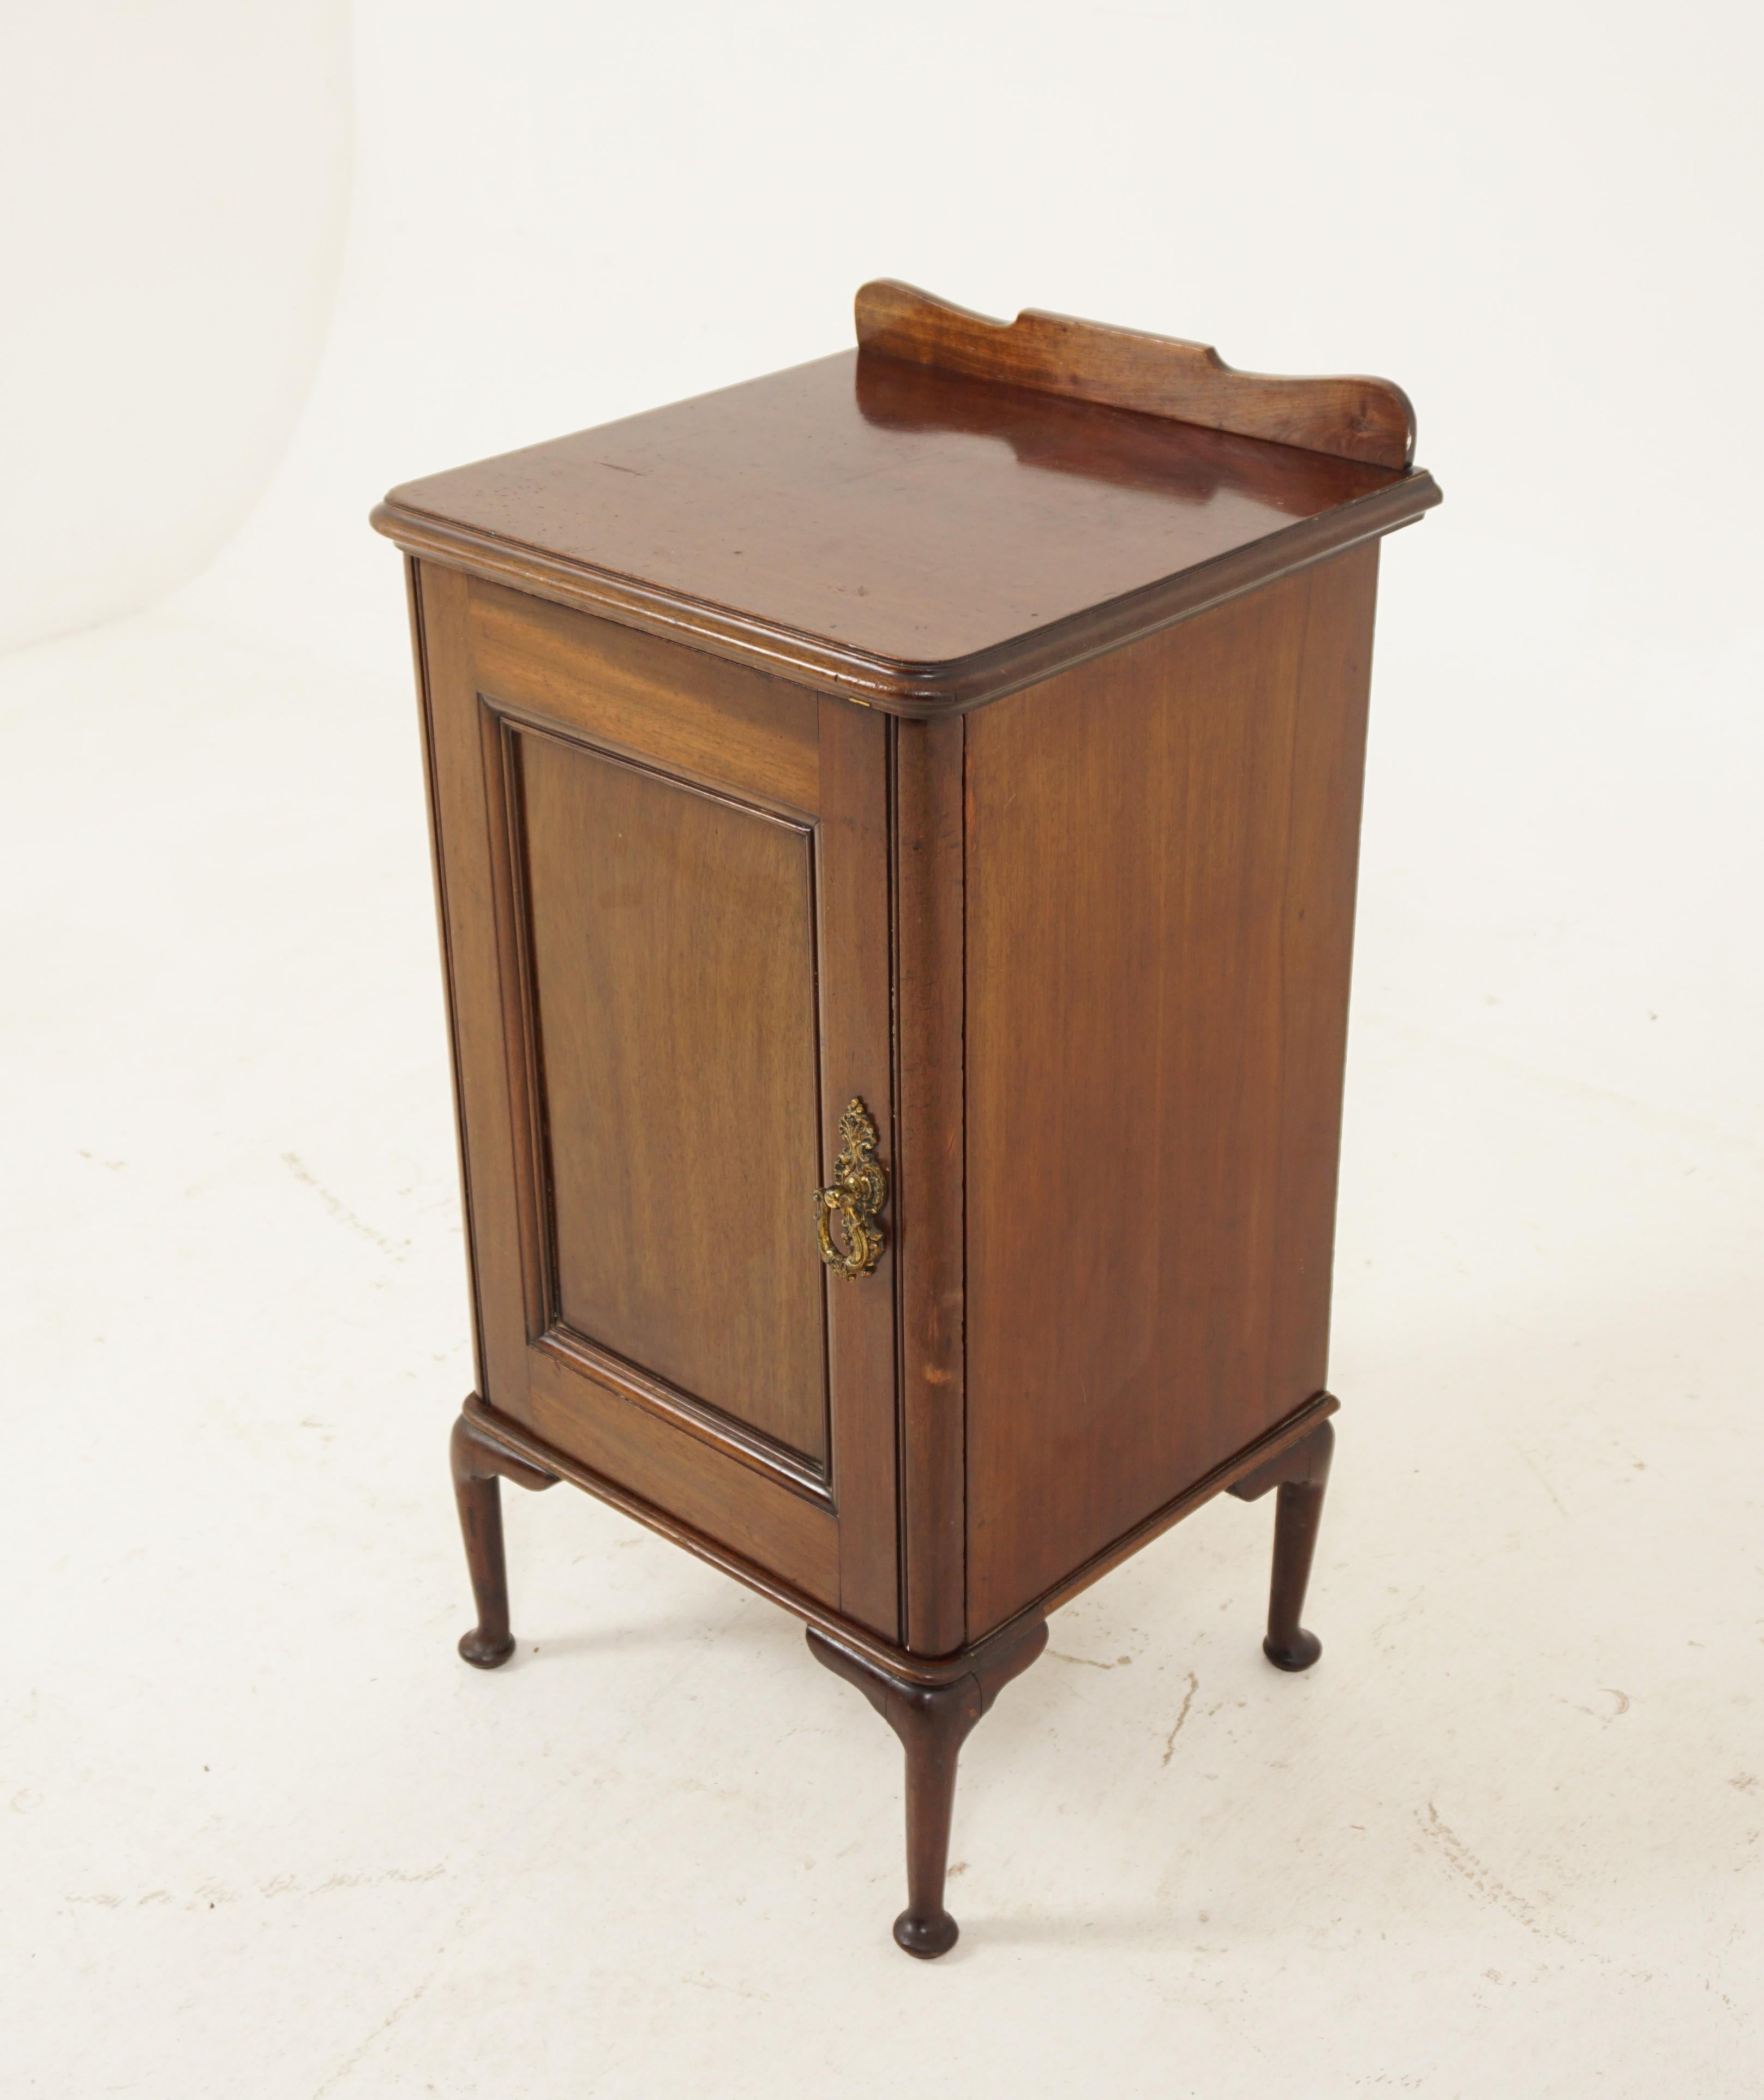 Antique Victorian Walnut Nightstand, Bedside, Lamp Table, Scotland 1900, H059

Scotland 19000
Solid Walnut
Original Finish
Rectangular top with rounded ends
Shaped pediment to the back
Single paneled door with original brass hardware
Open to reveal